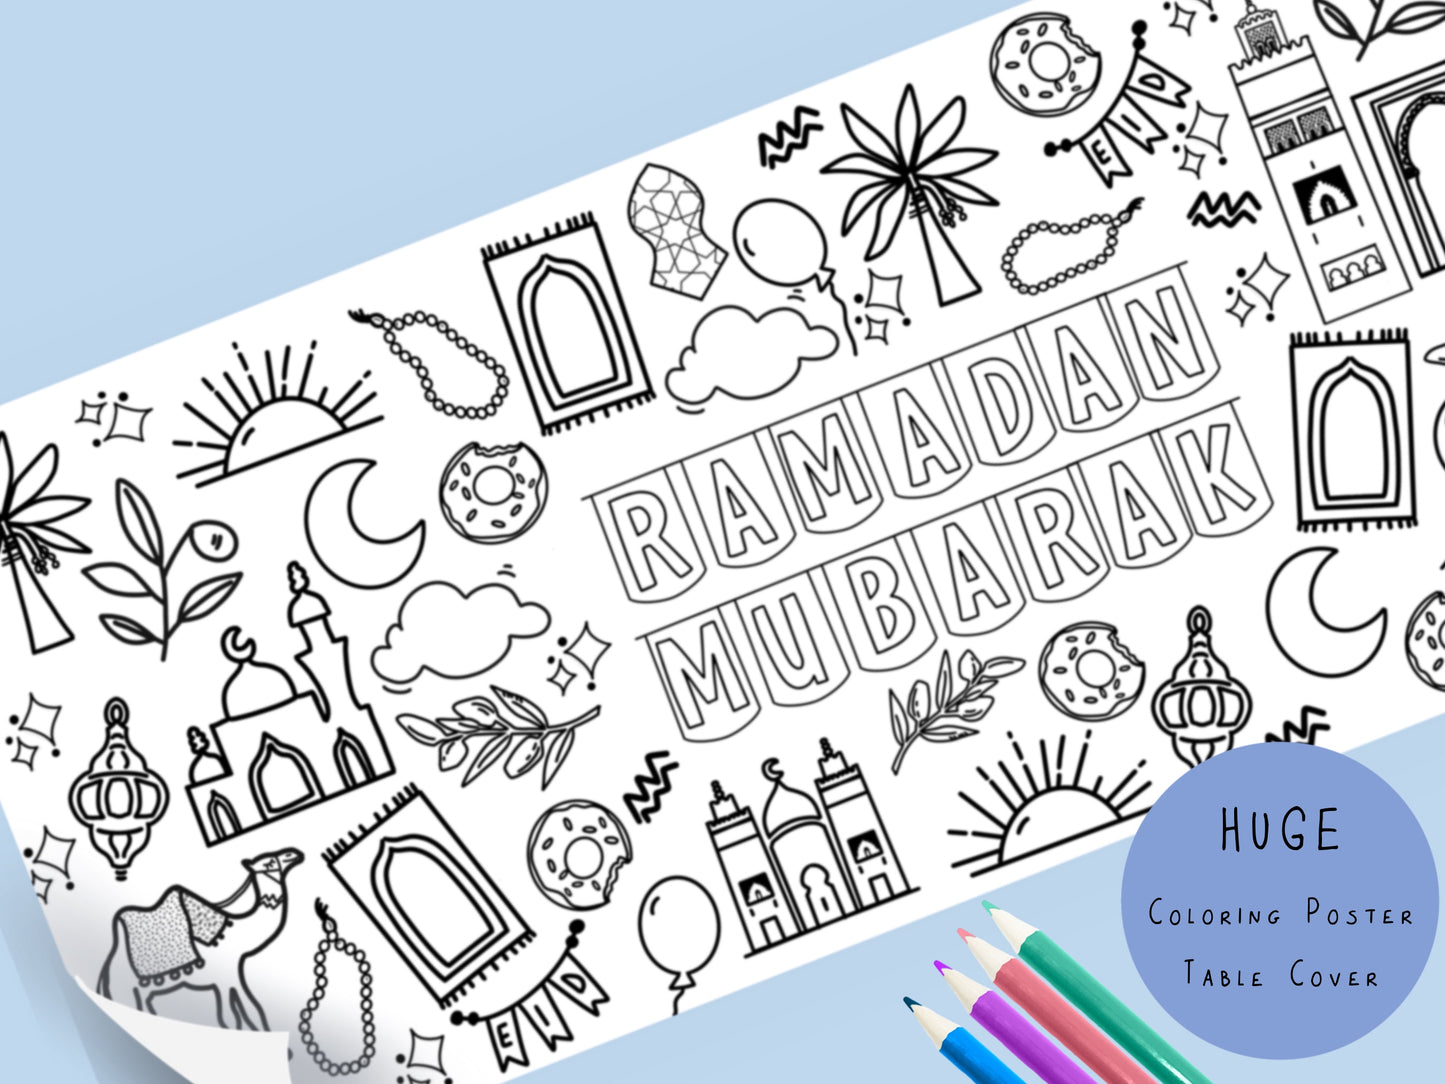 Huge Ramadan  Coloring Poster | Coloring Table Cover | Free Shipping